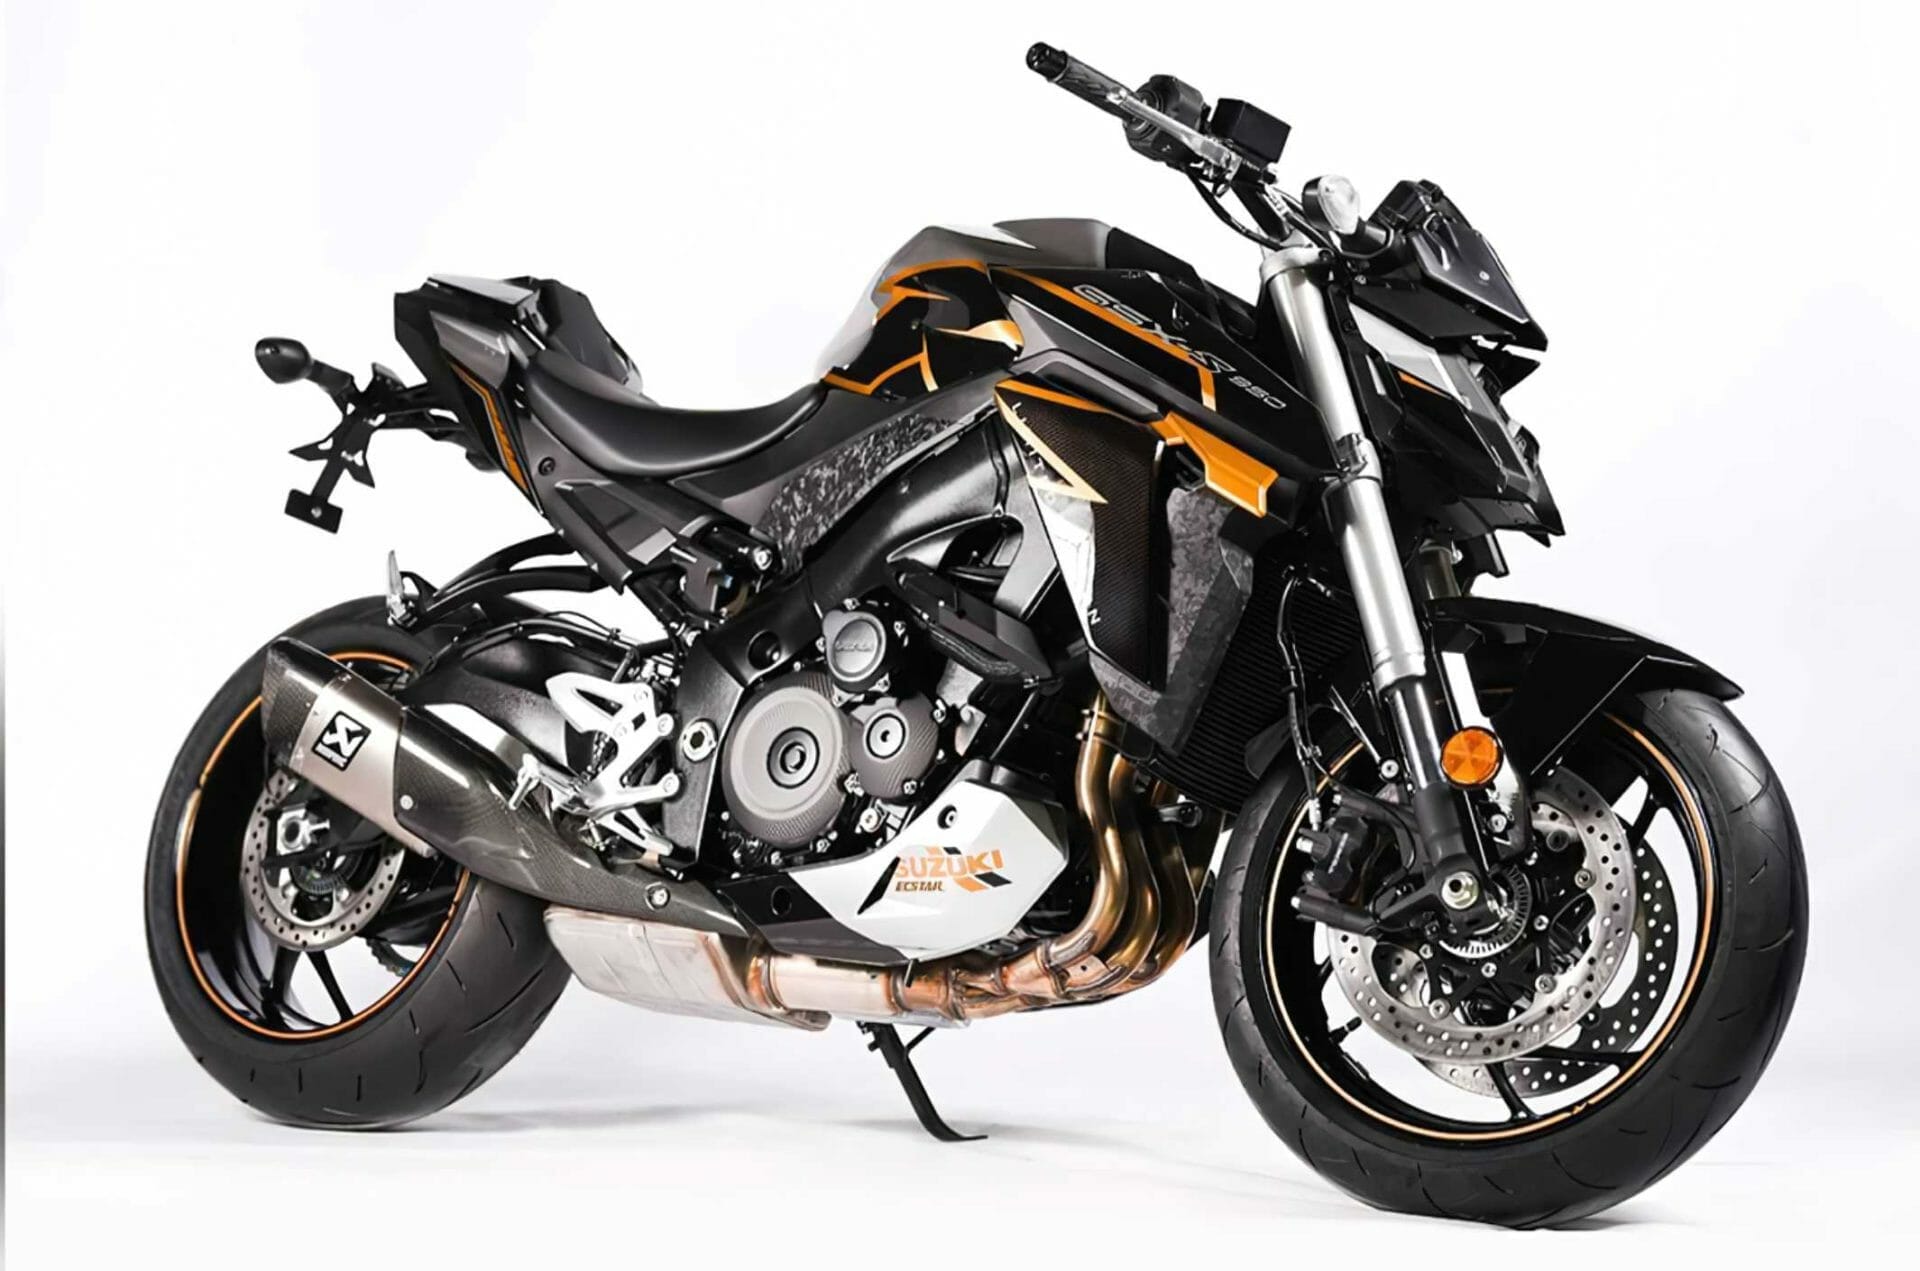 Limited GSX-S950 R for France - MOTORCYCLES.NEWS